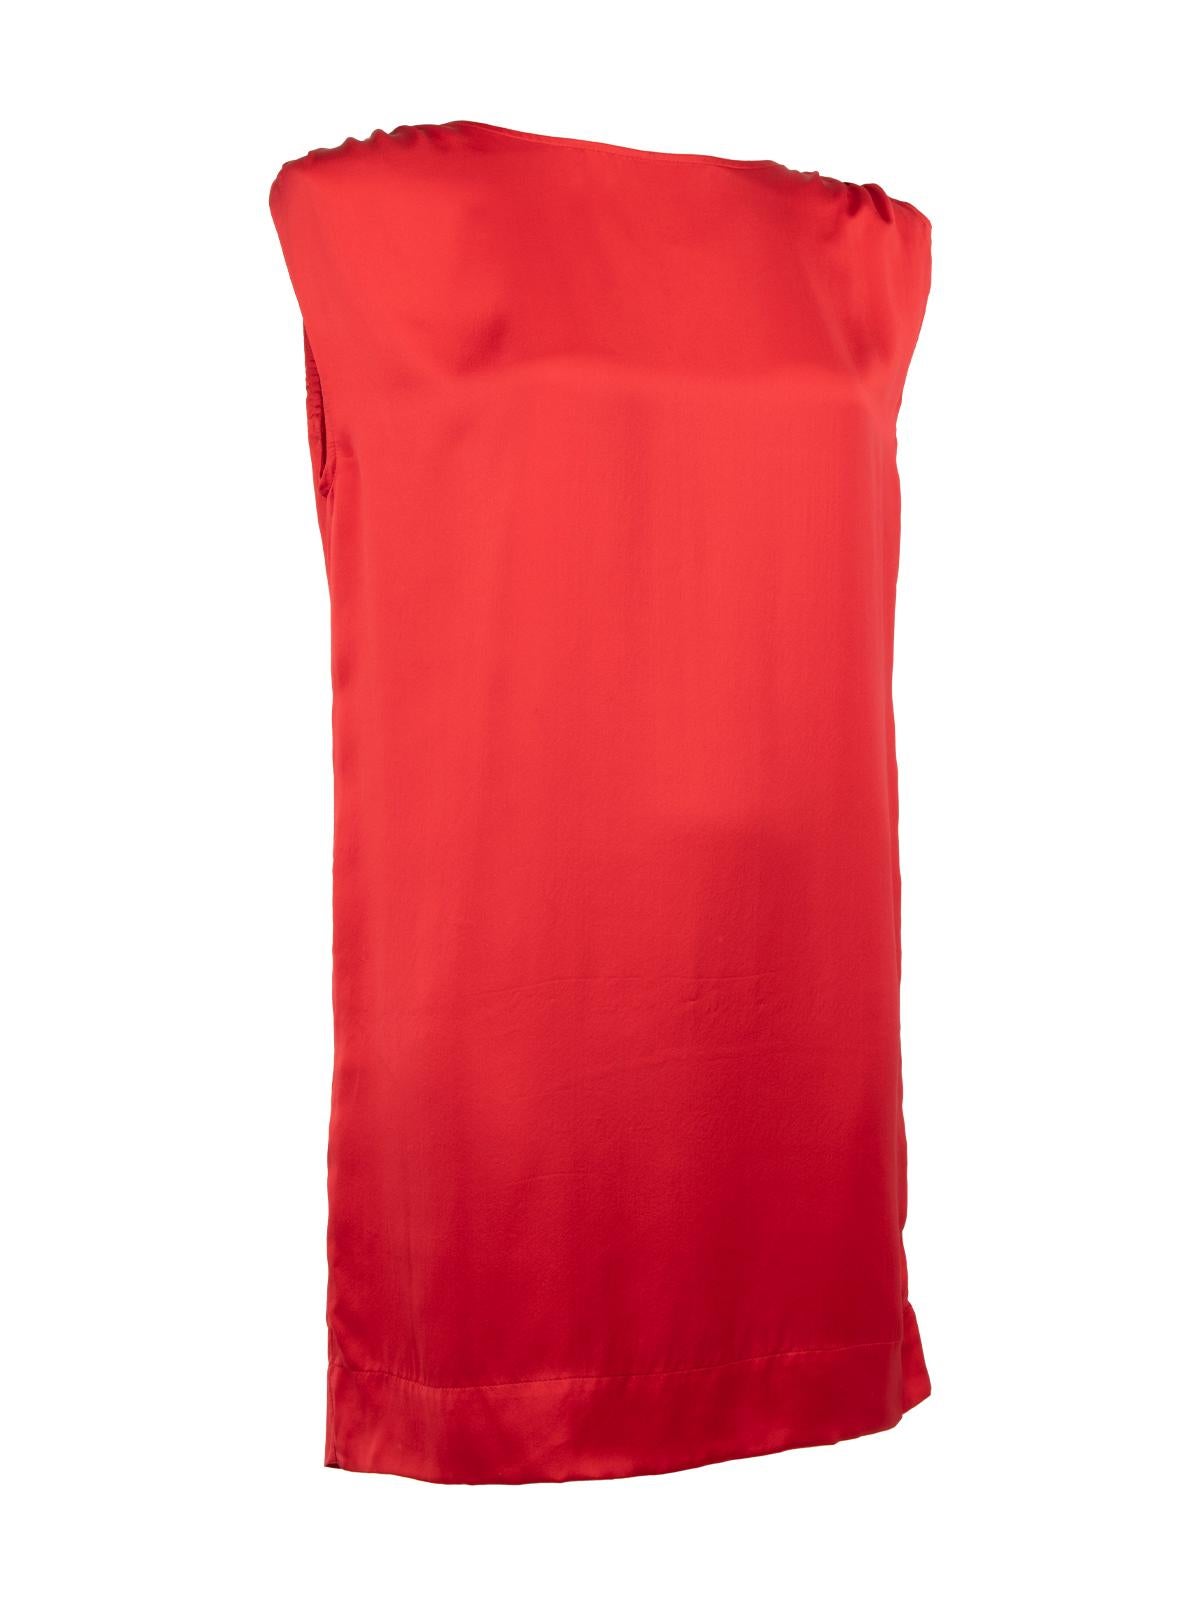 CONDITION is Very good. Hardly any visible wear to top is evident on this used Stella McCartney designer resale item. Details Red Silk Style Loose fit Sleeveless Crew neck Made in Hungary Composition 100% SILK Care instructions: Professional dry